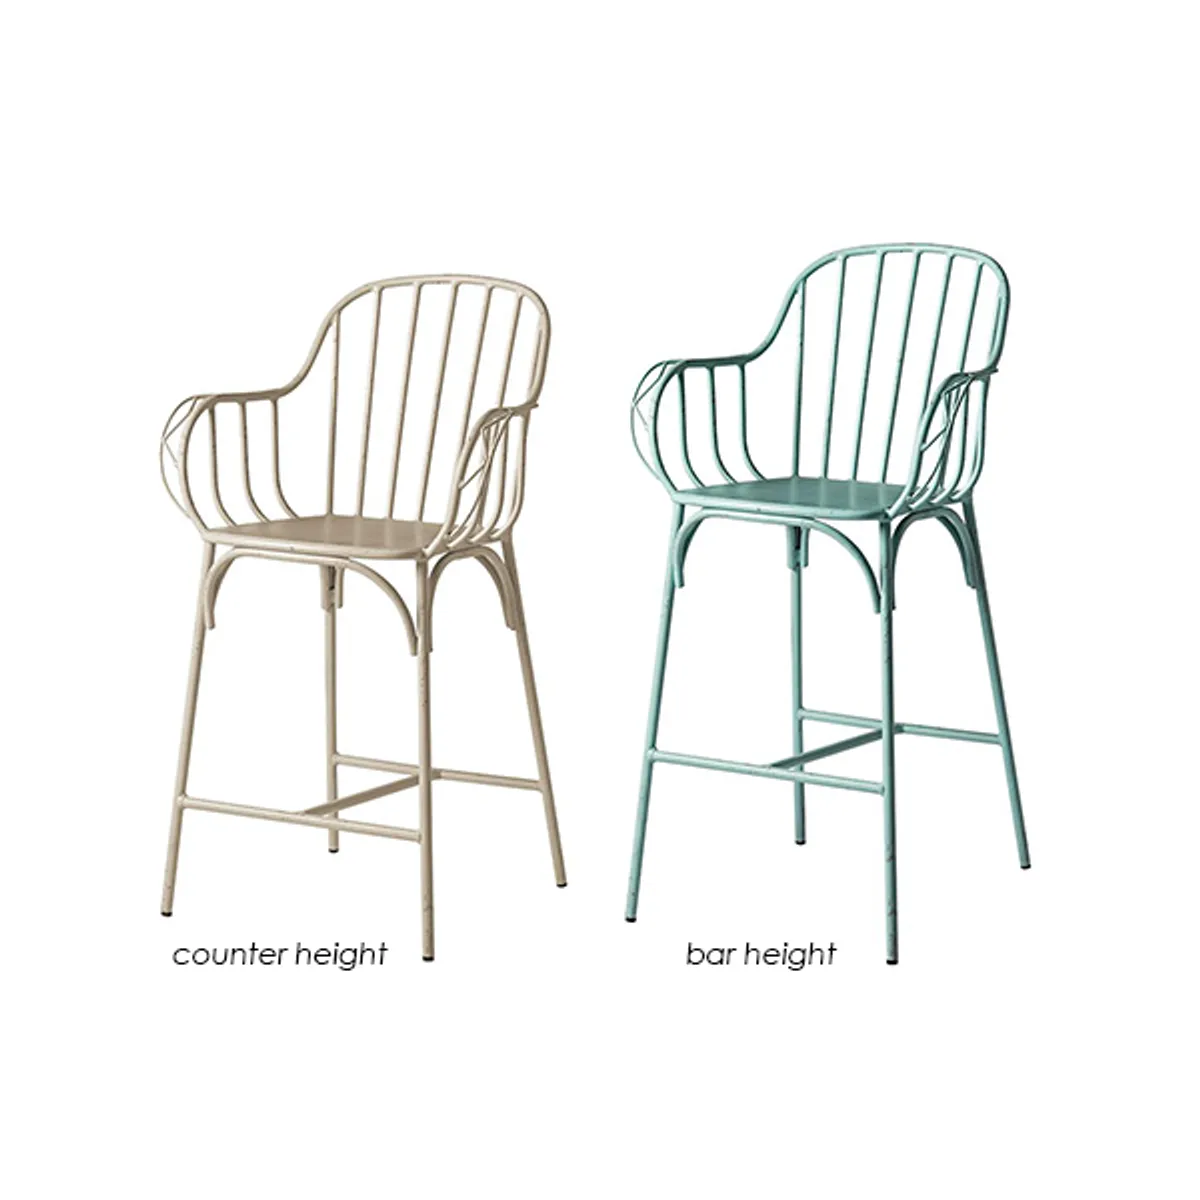 Marigold Barstools Outdoor Retro Inside Out Contracts